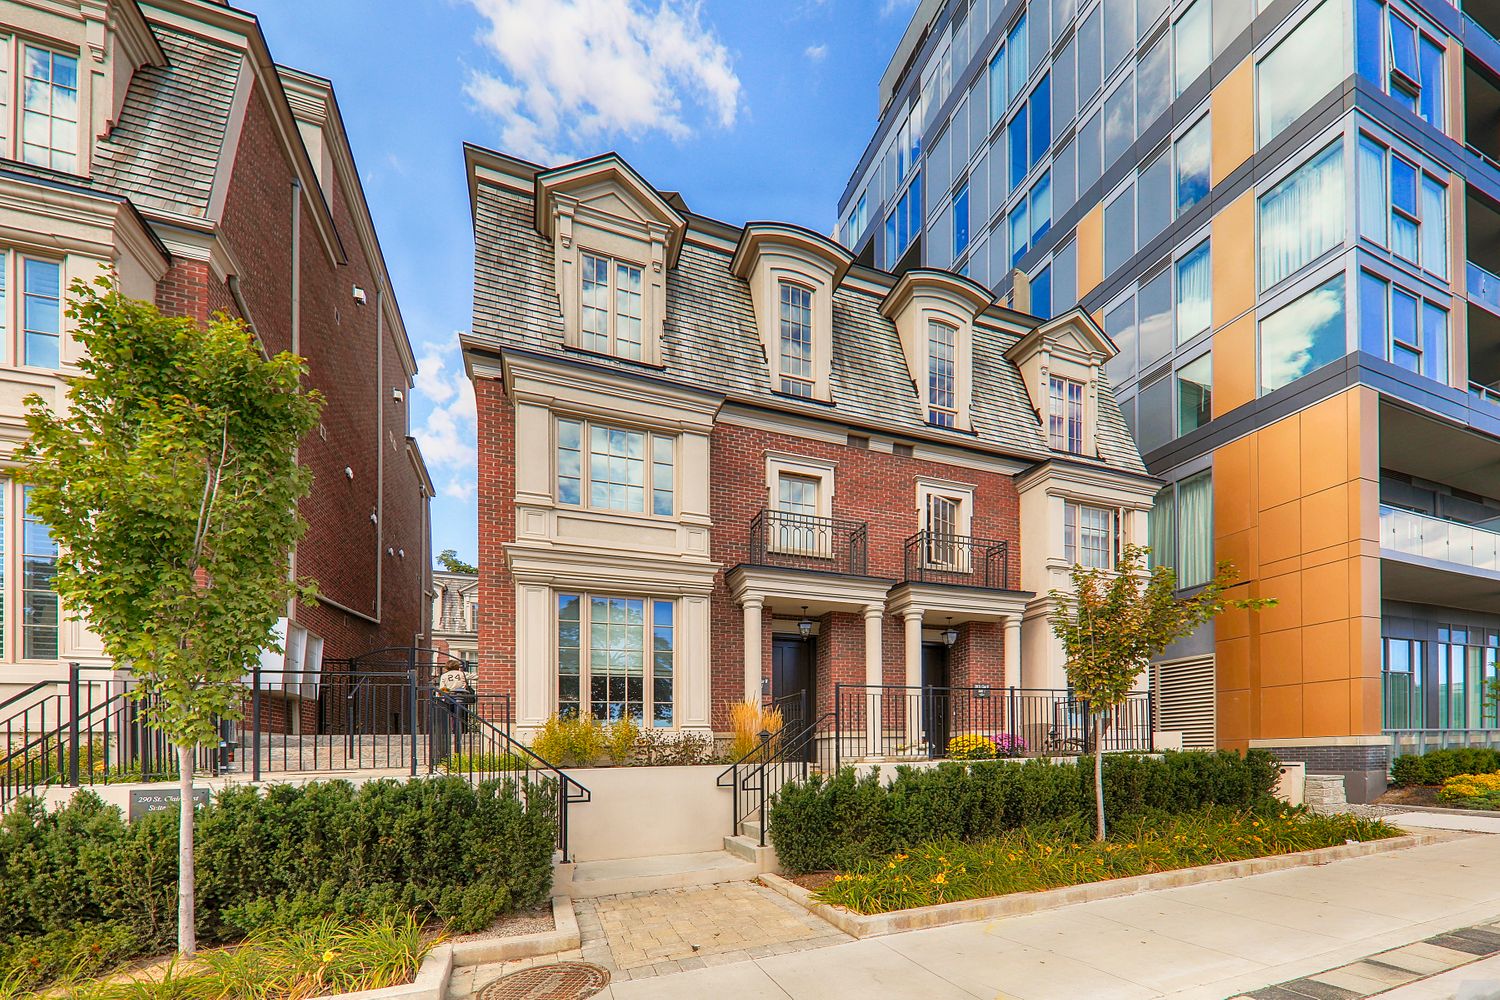 288-292 St Clair Avenue W. Churchill Collection Townhomes is located in  Midtown, Toronto - image #1 of 4